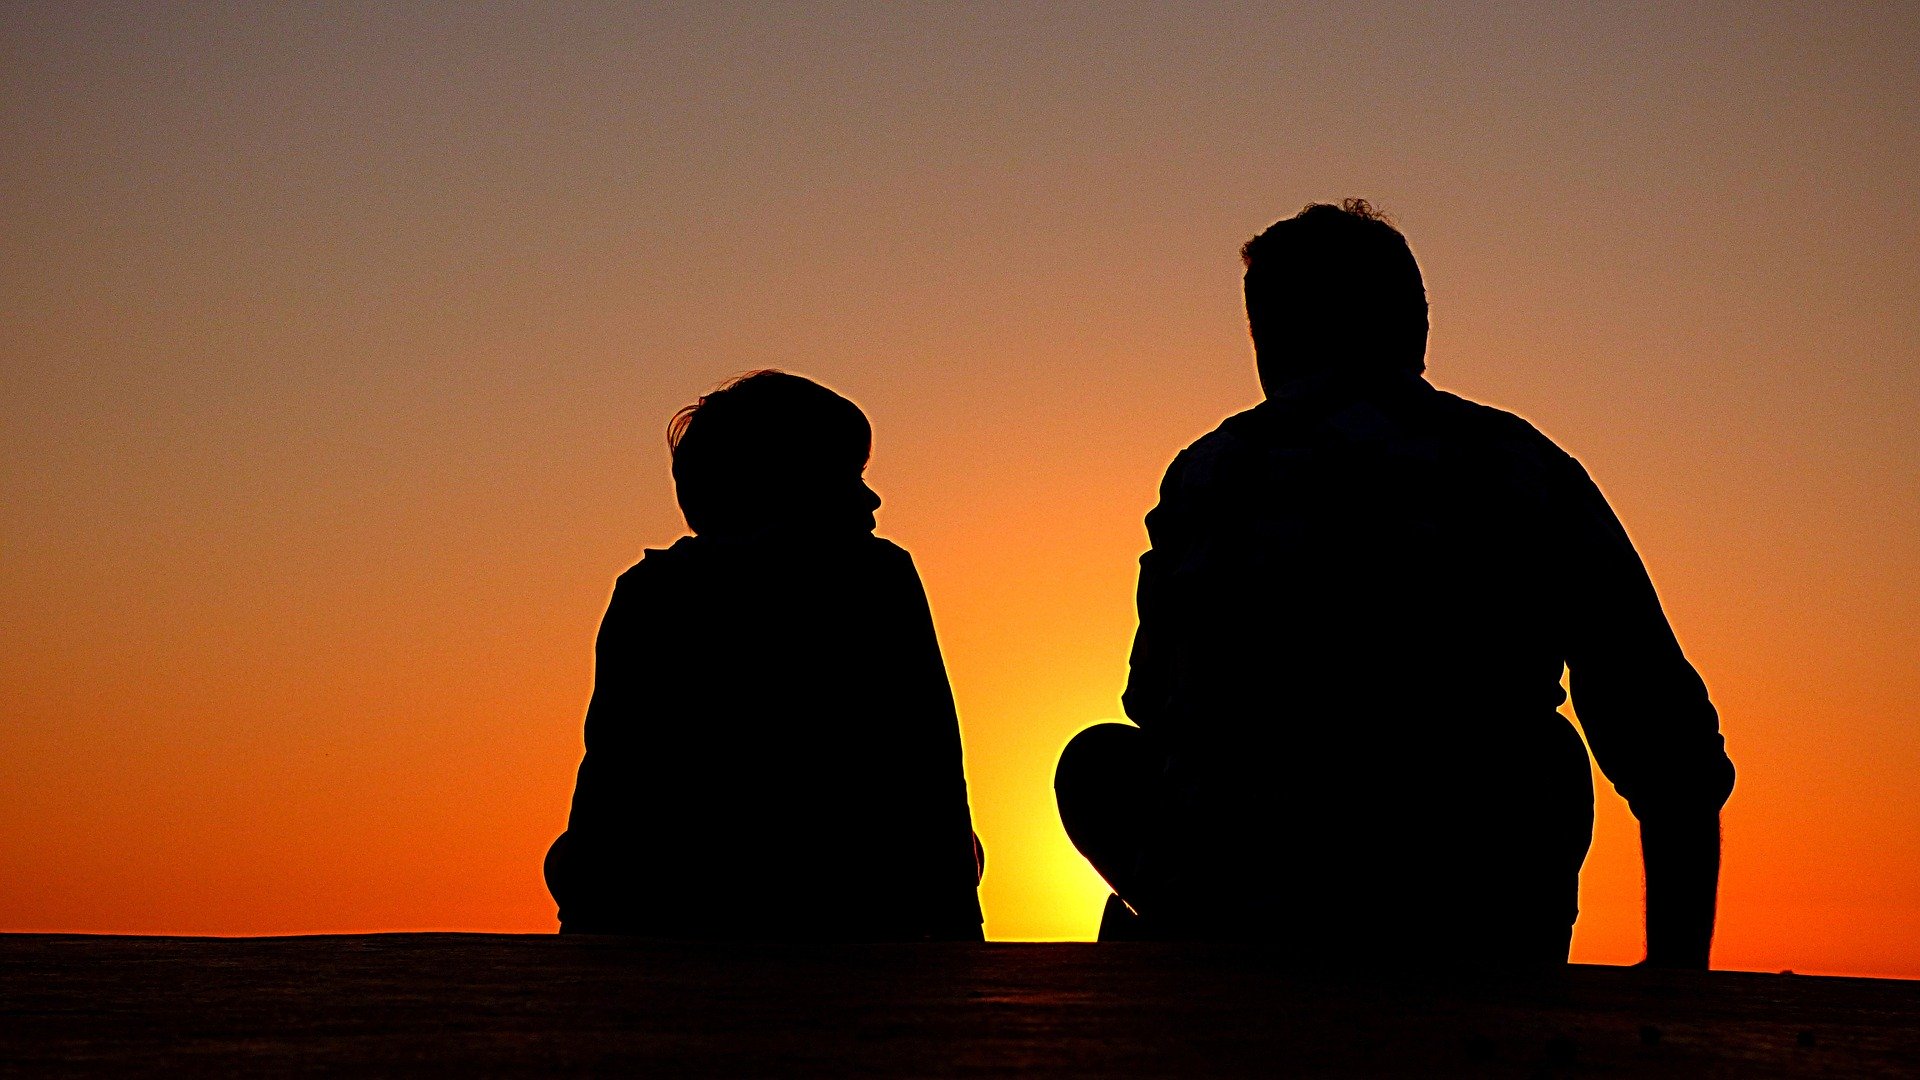 sunset silhouettes man and child